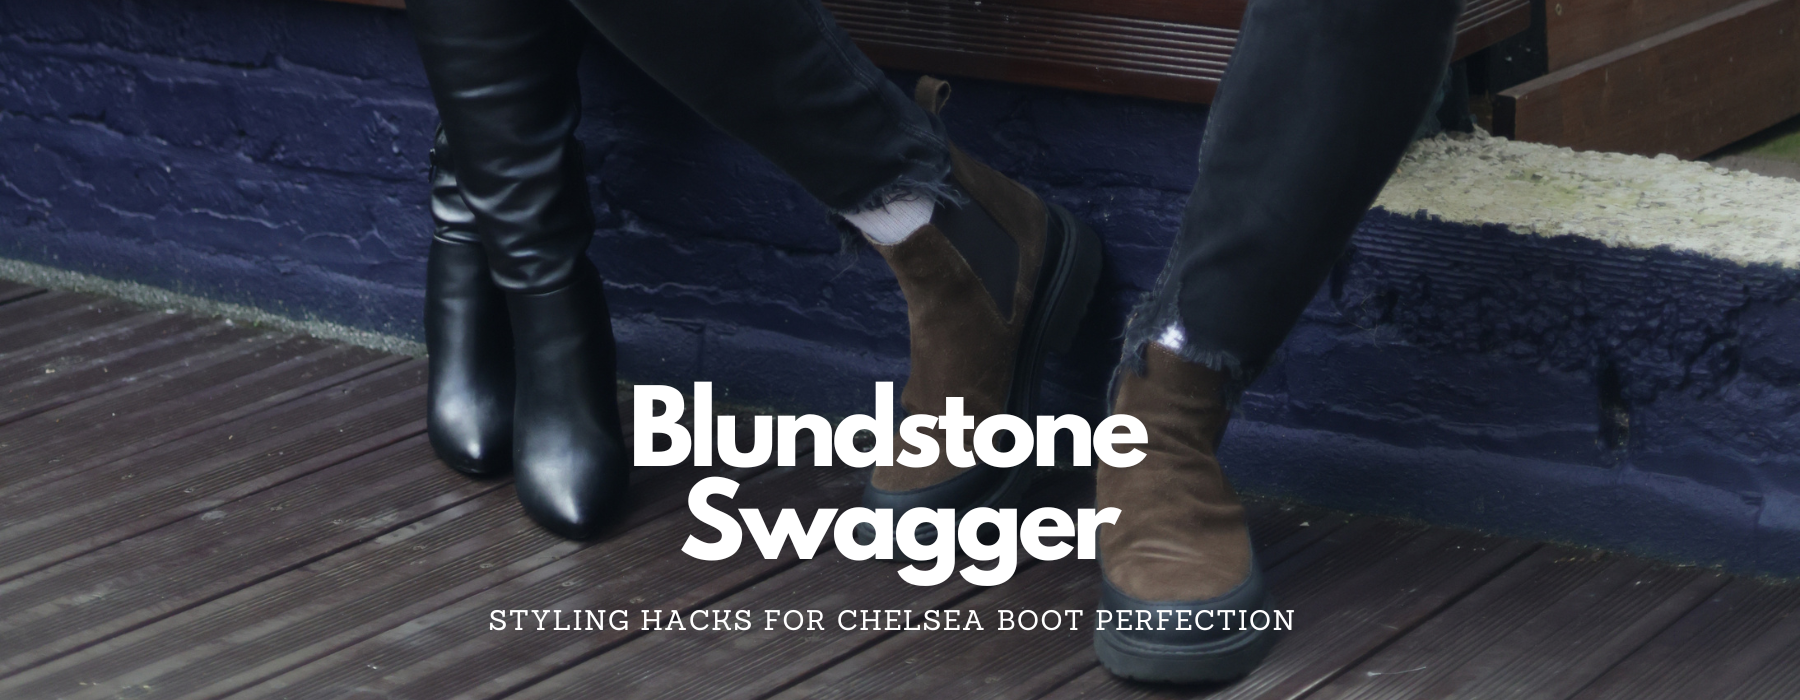 Blundstone Swagger: Styling Hacks for Chelsea Boot Perfection - Upperclass Fashions 